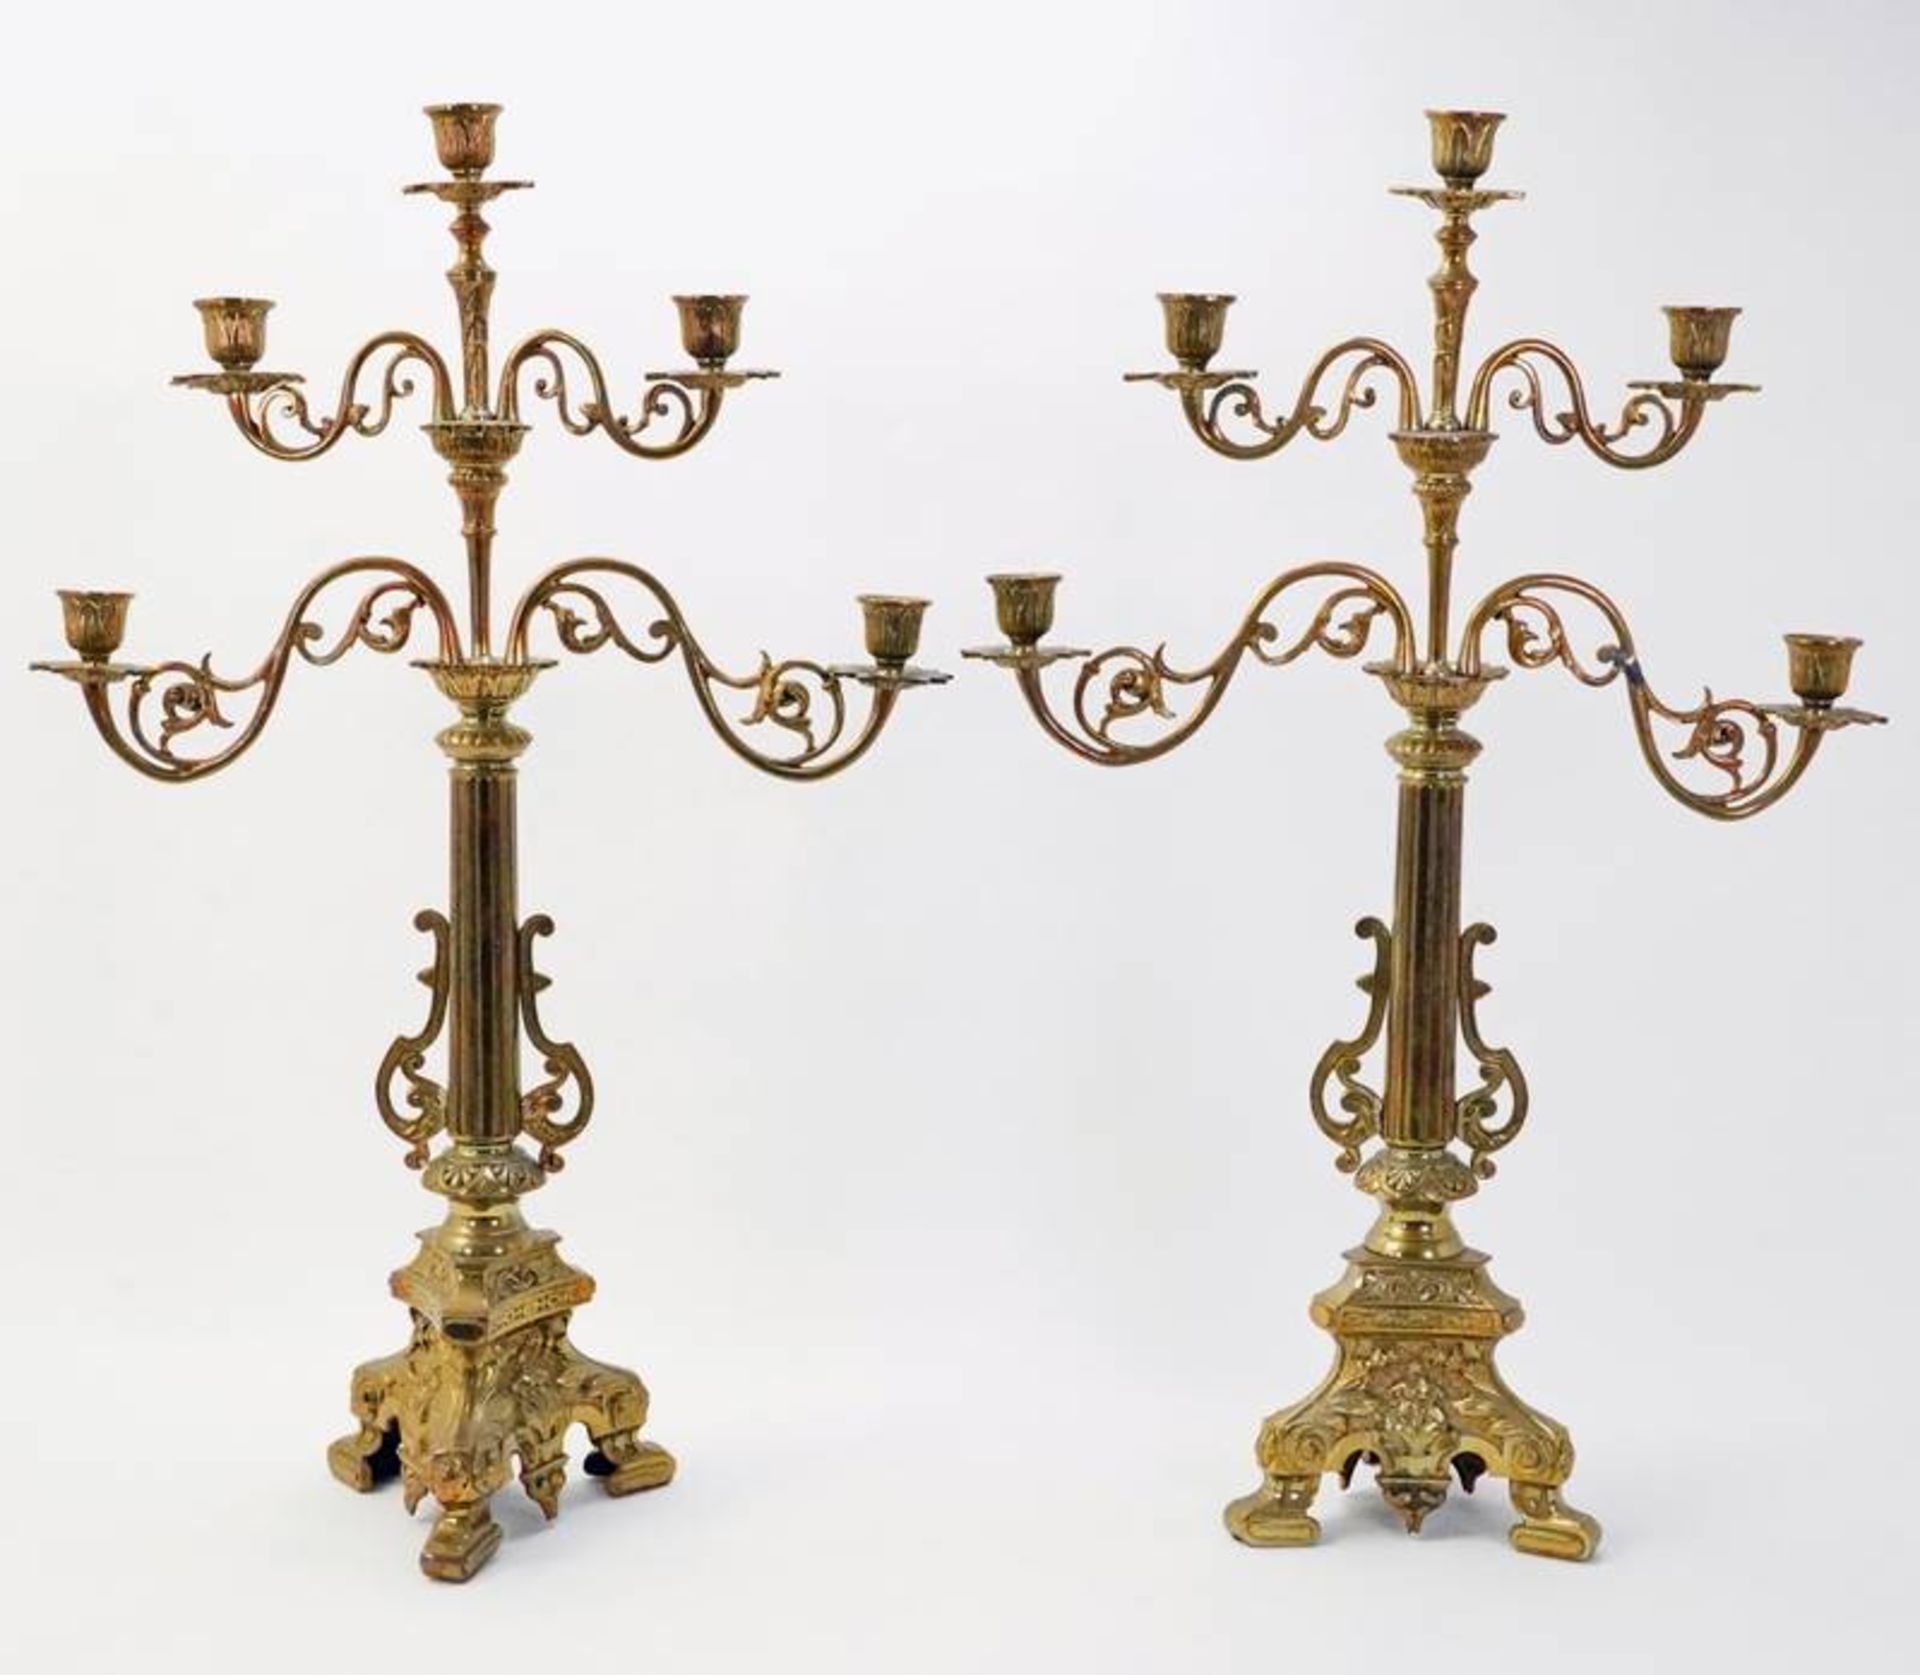 Pair of magnificent table candlesticks